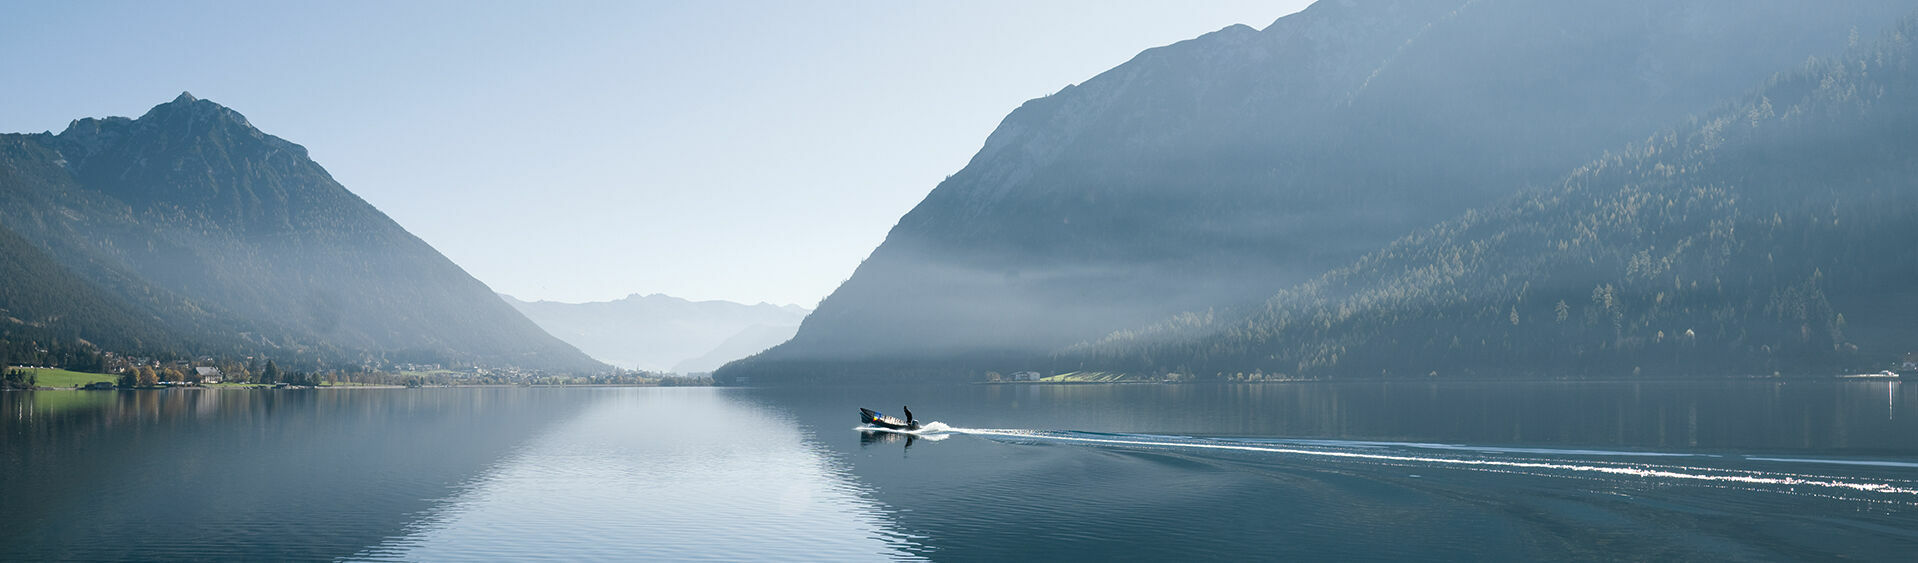 Early risers enjoying a boat tour on Lake Achensee.